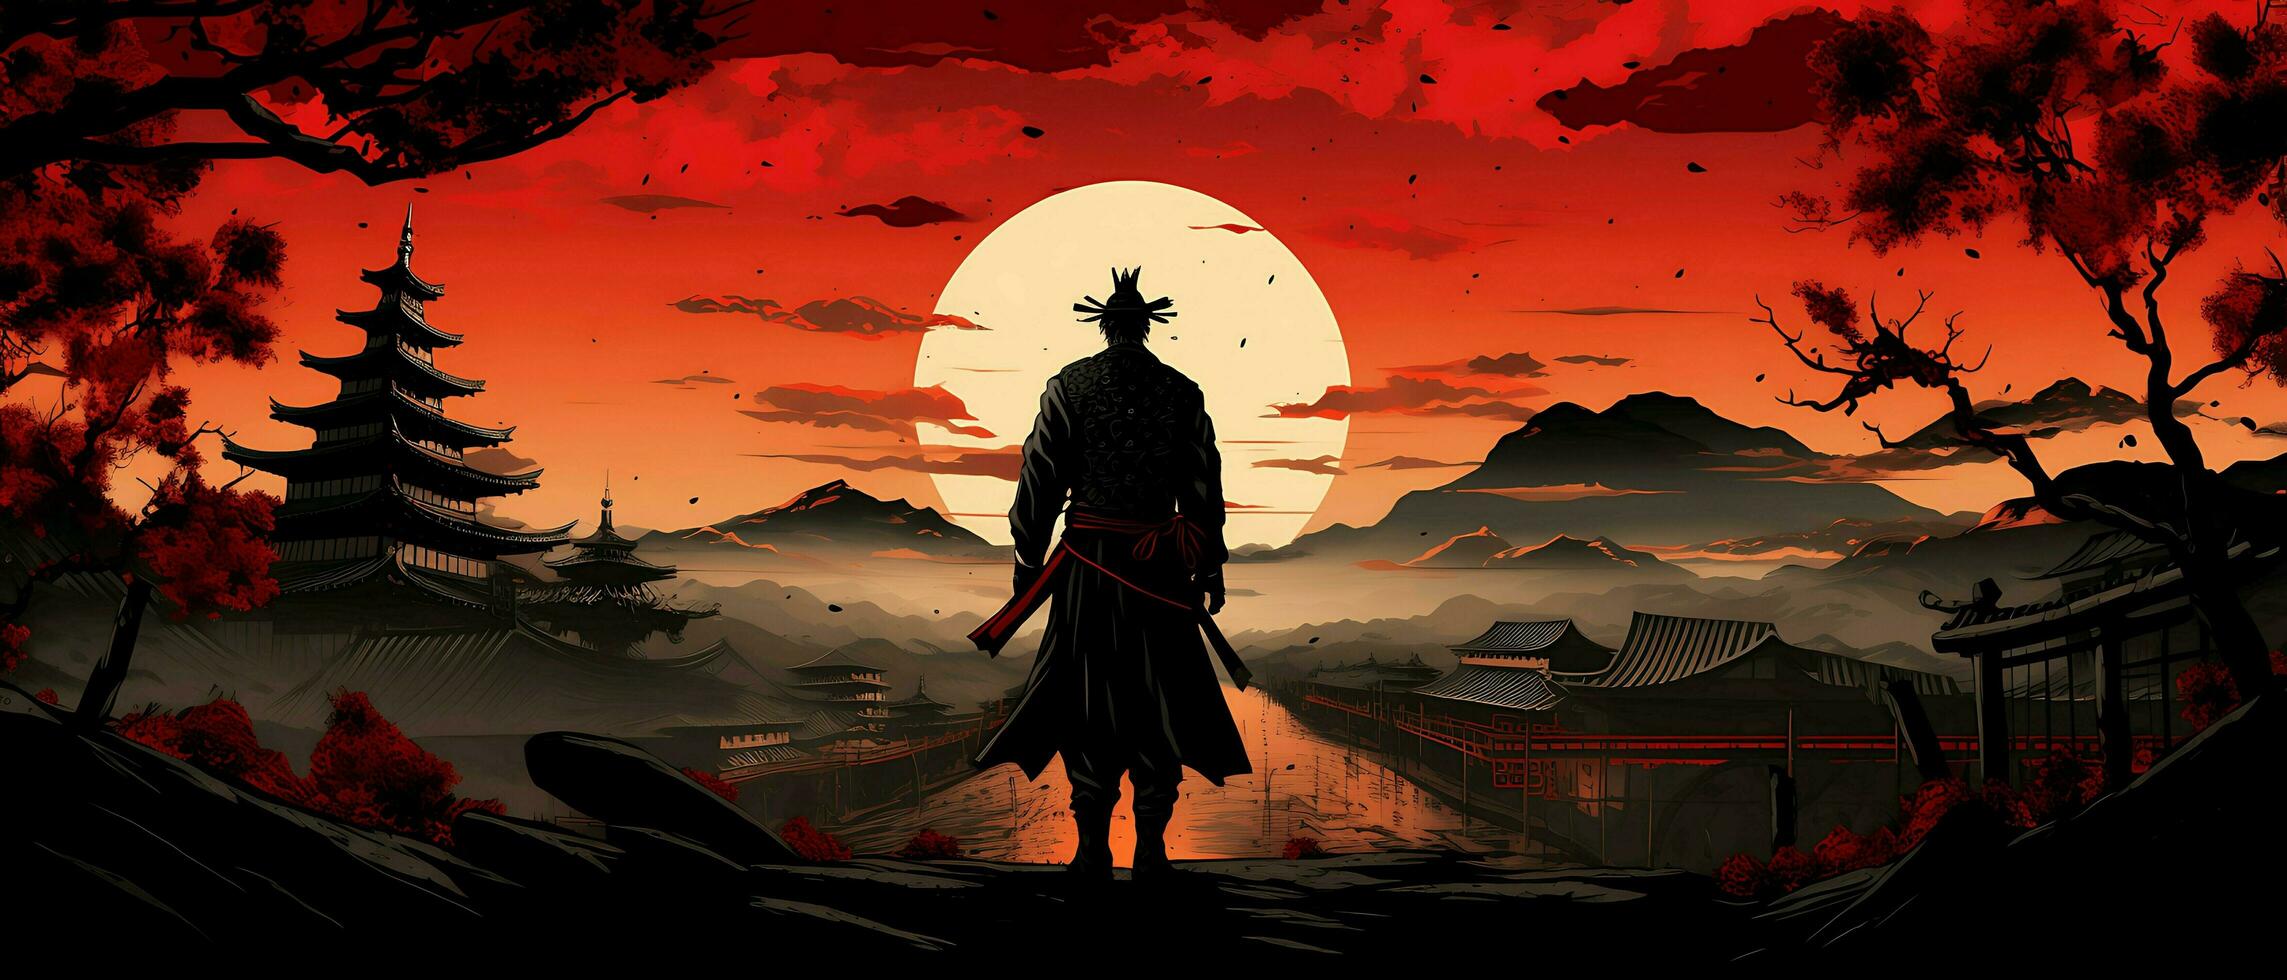 Samurai Wallpaper Stock Photos, Images and Backgrounds for Free Download